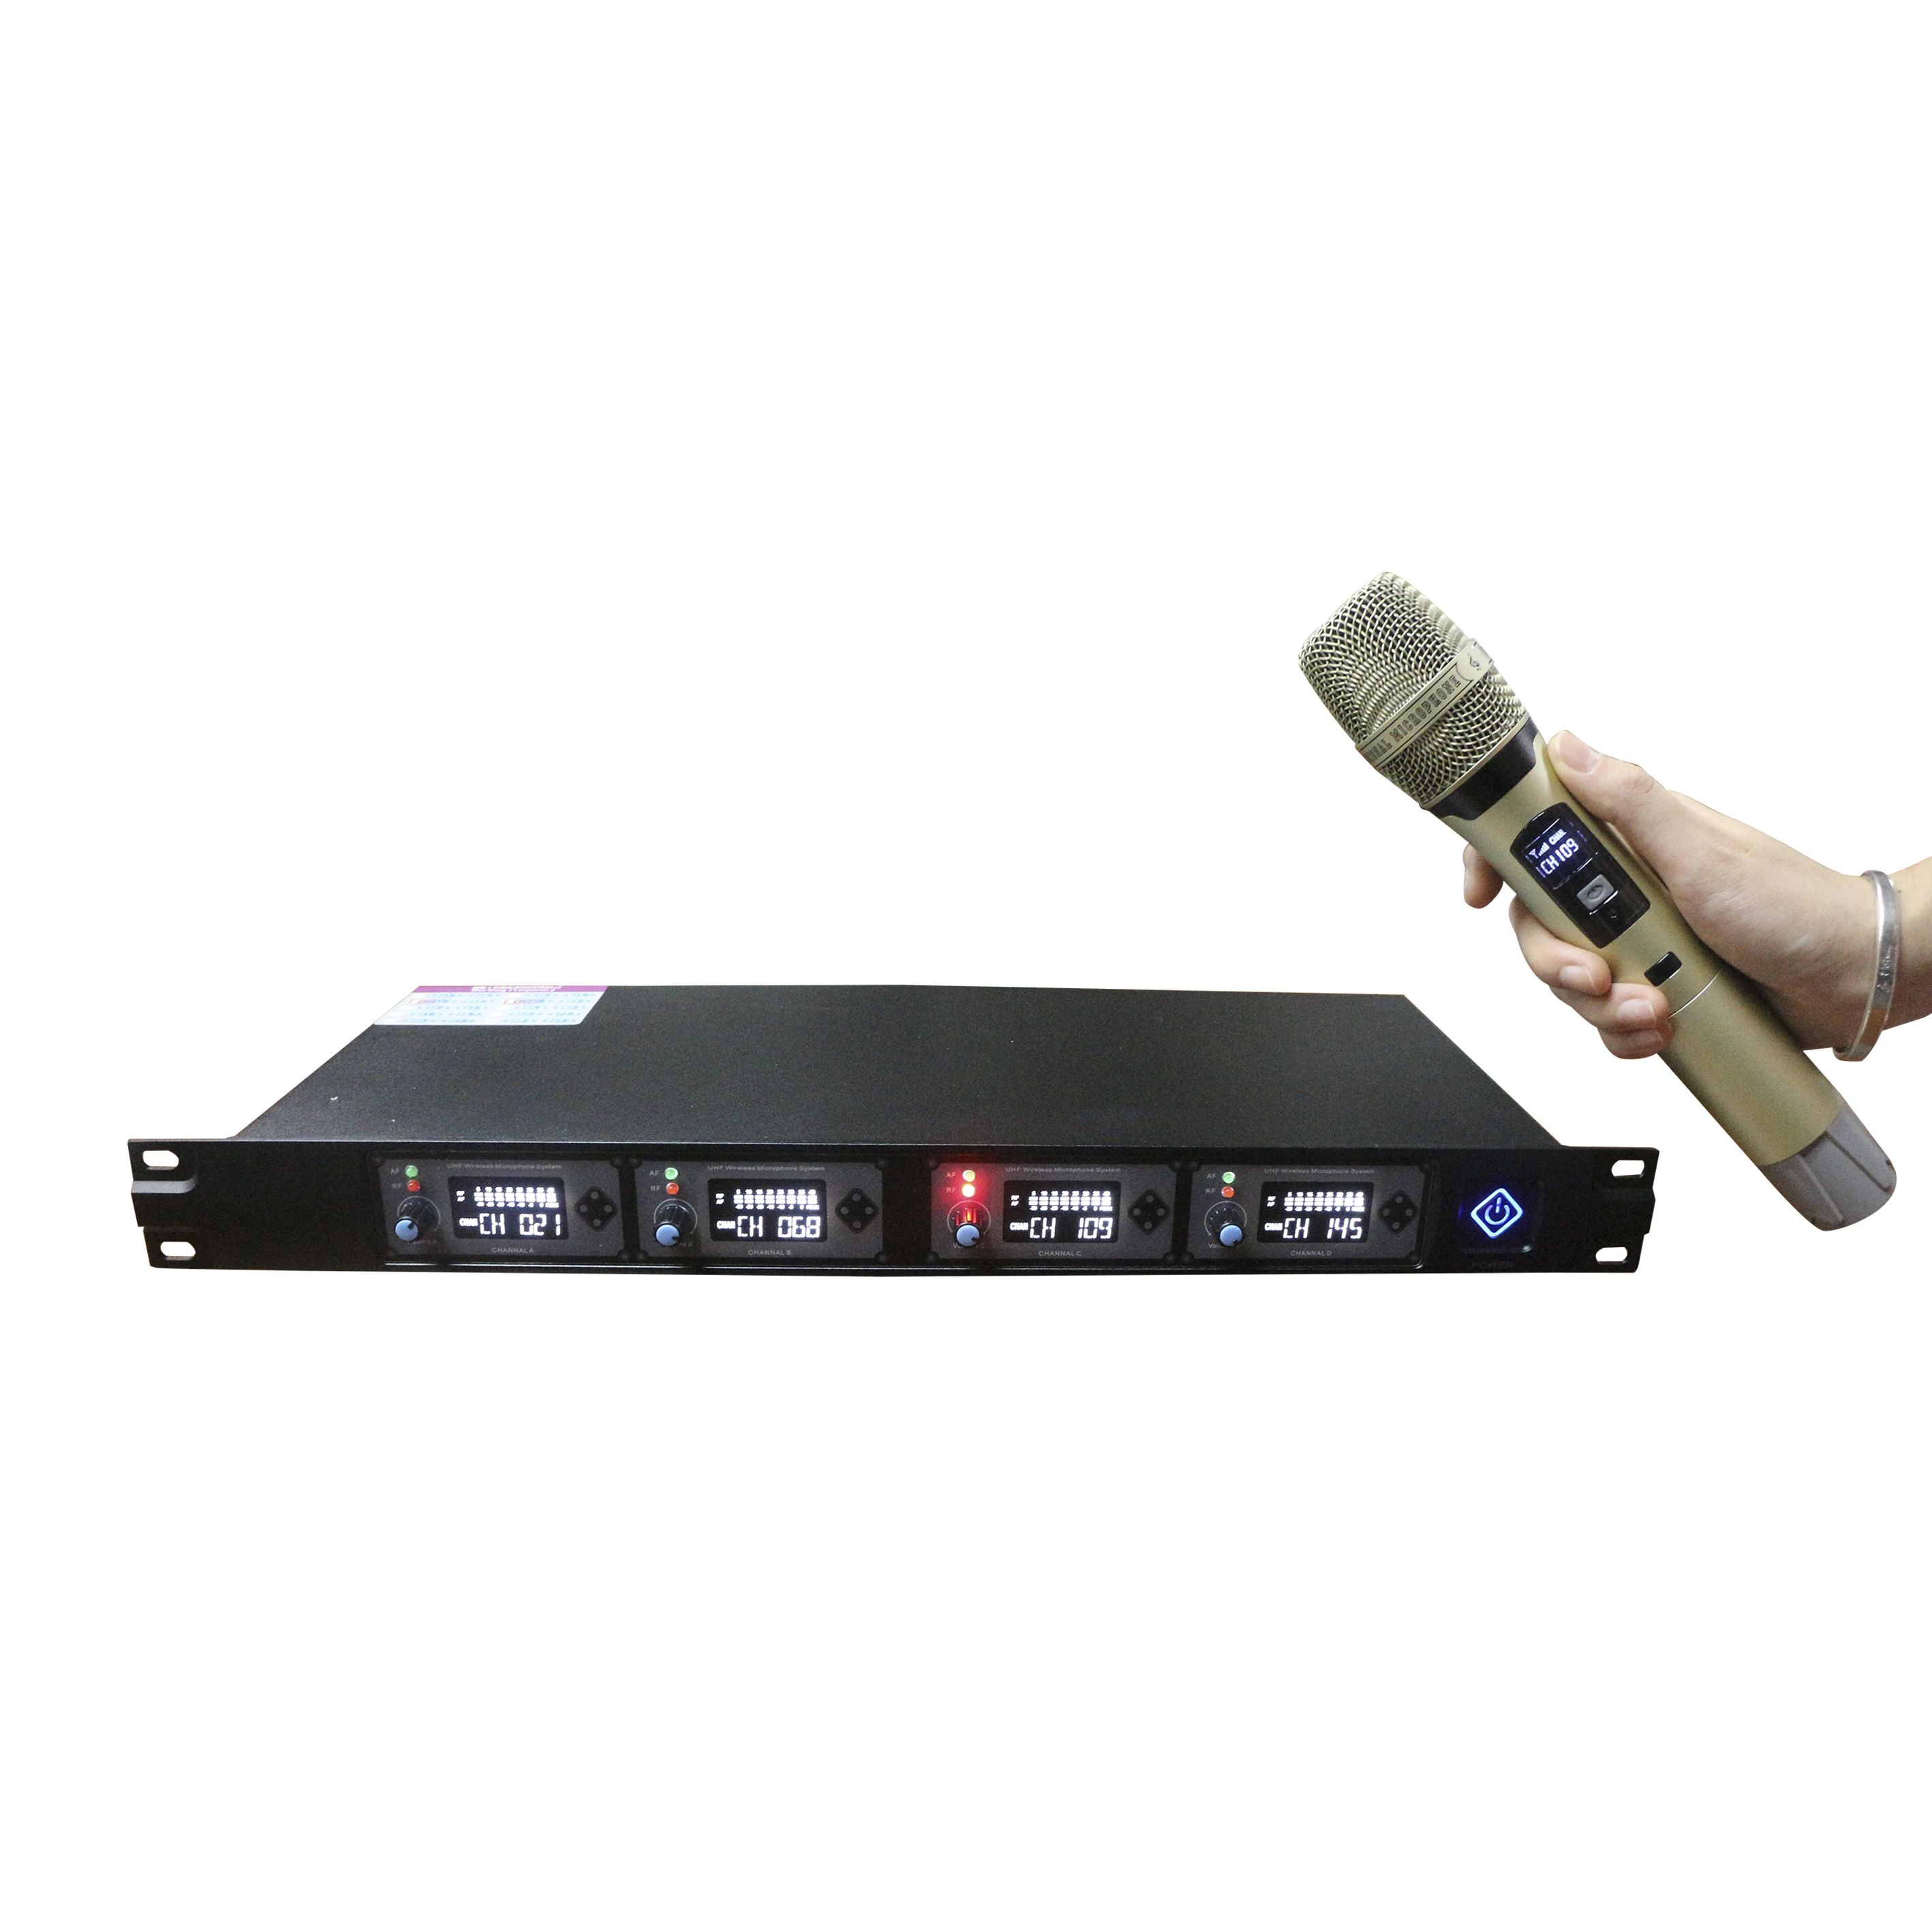 WM 4000U Professional UHF 4 Channel Handheld Wireless microphone System suitable for church, education, and live performance (62060150539)